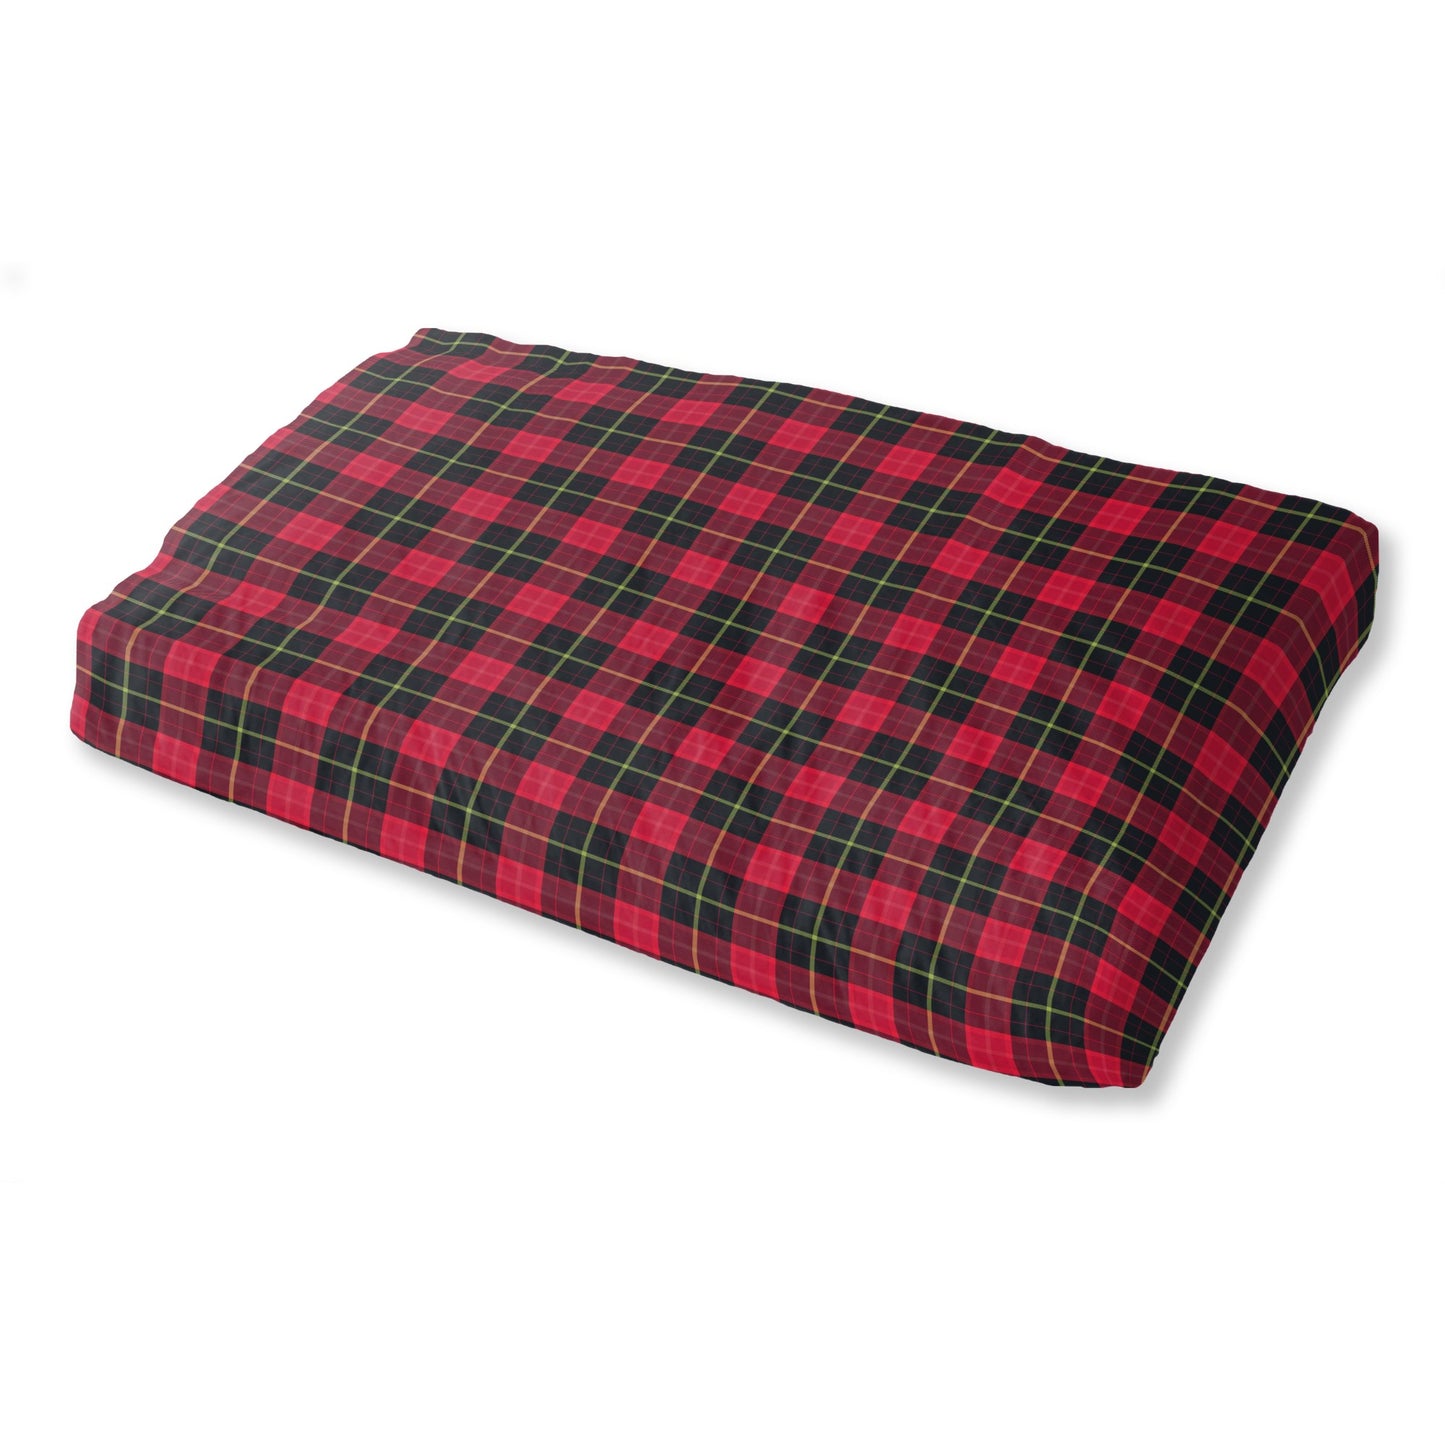 Red Plaid Pet Bed - shades and stripes of green and red with gold or yellow mixed in